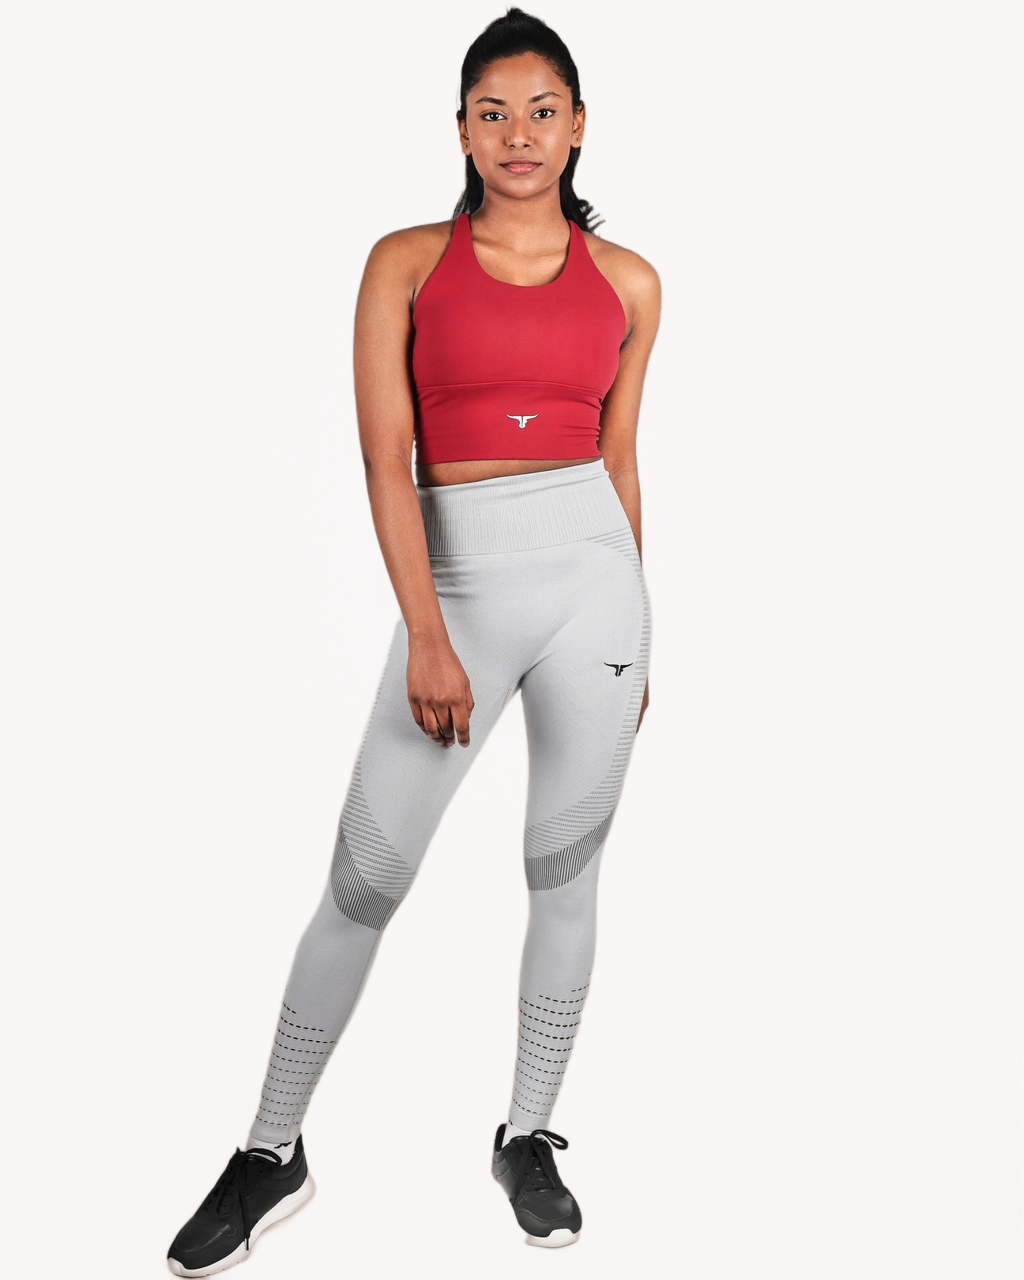 THUGFIT FunkyHues Performance-Stride Fitness Leggings - Green